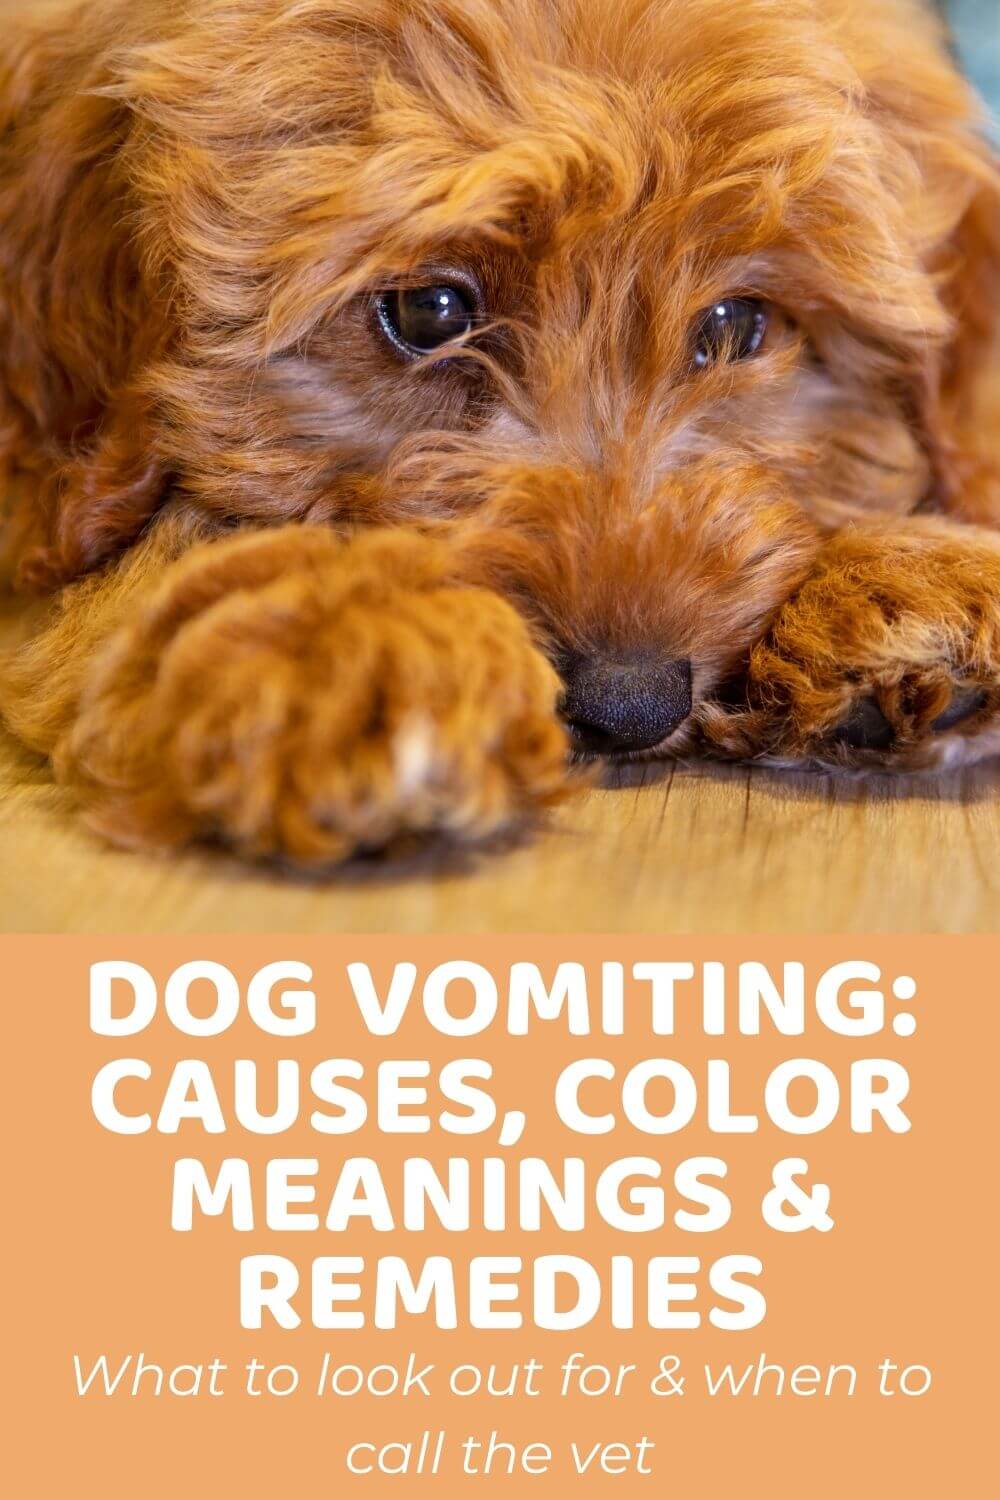 Dog Vomiting Causes, Color Meanings, and Remedies